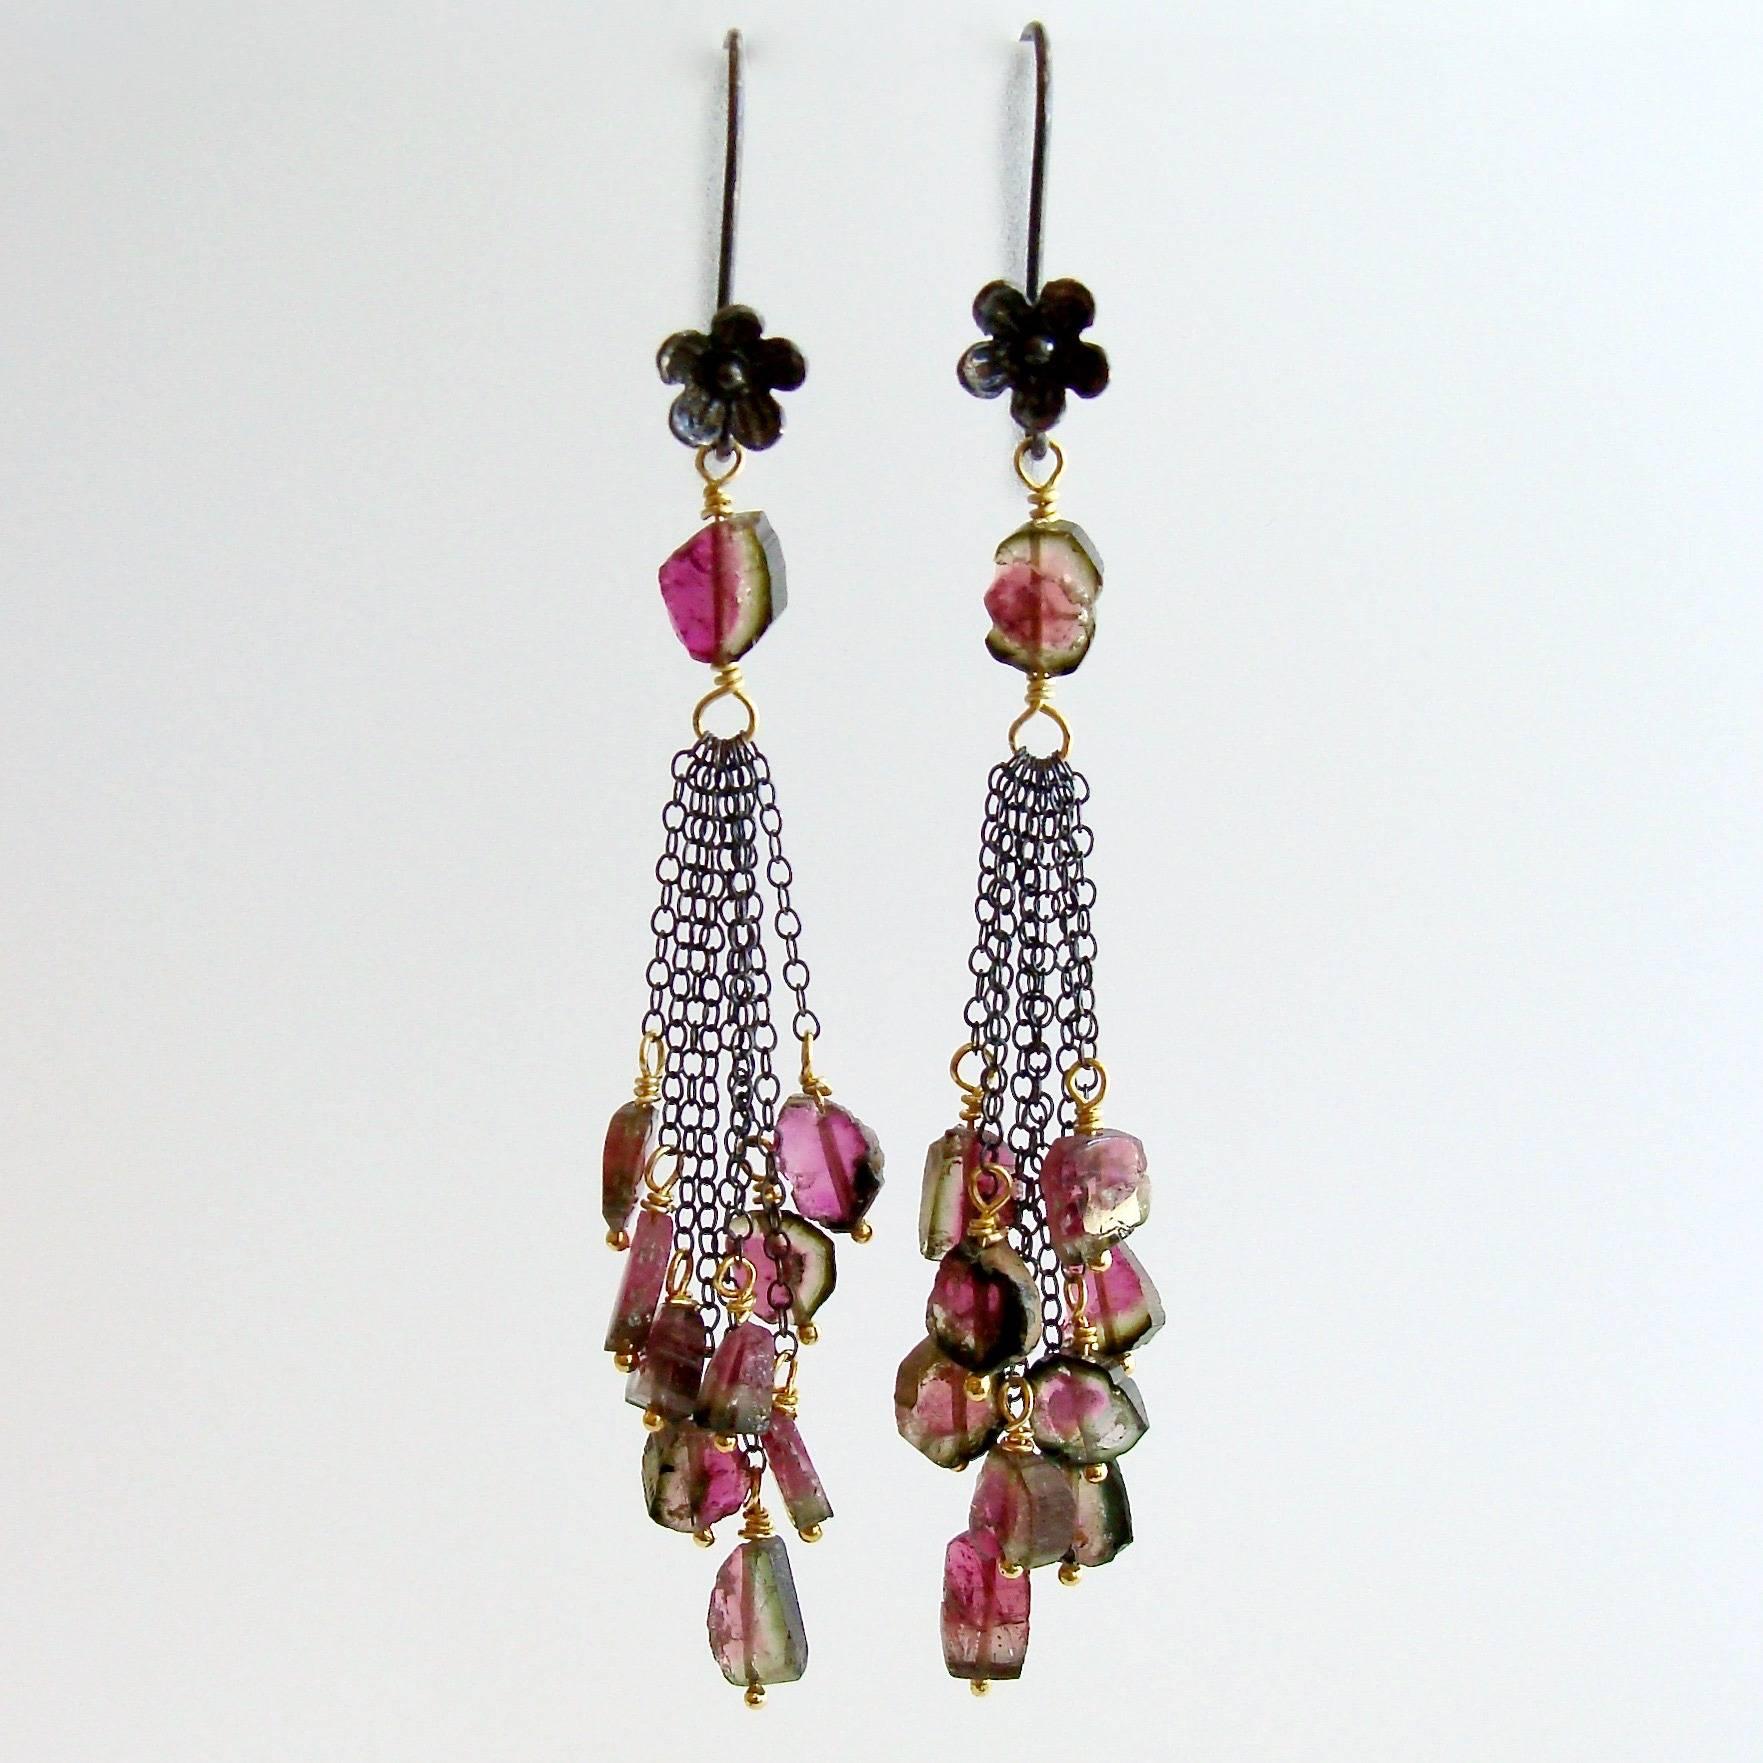 Willow Duster Earrings.

A jaw-dropping grouping of festive watermelon tourmaline slices have been paired with oxidized silver and gold vermeil to create these Bohemian style duster tassel earrings.  The mixed metals of the oxidized silver flower